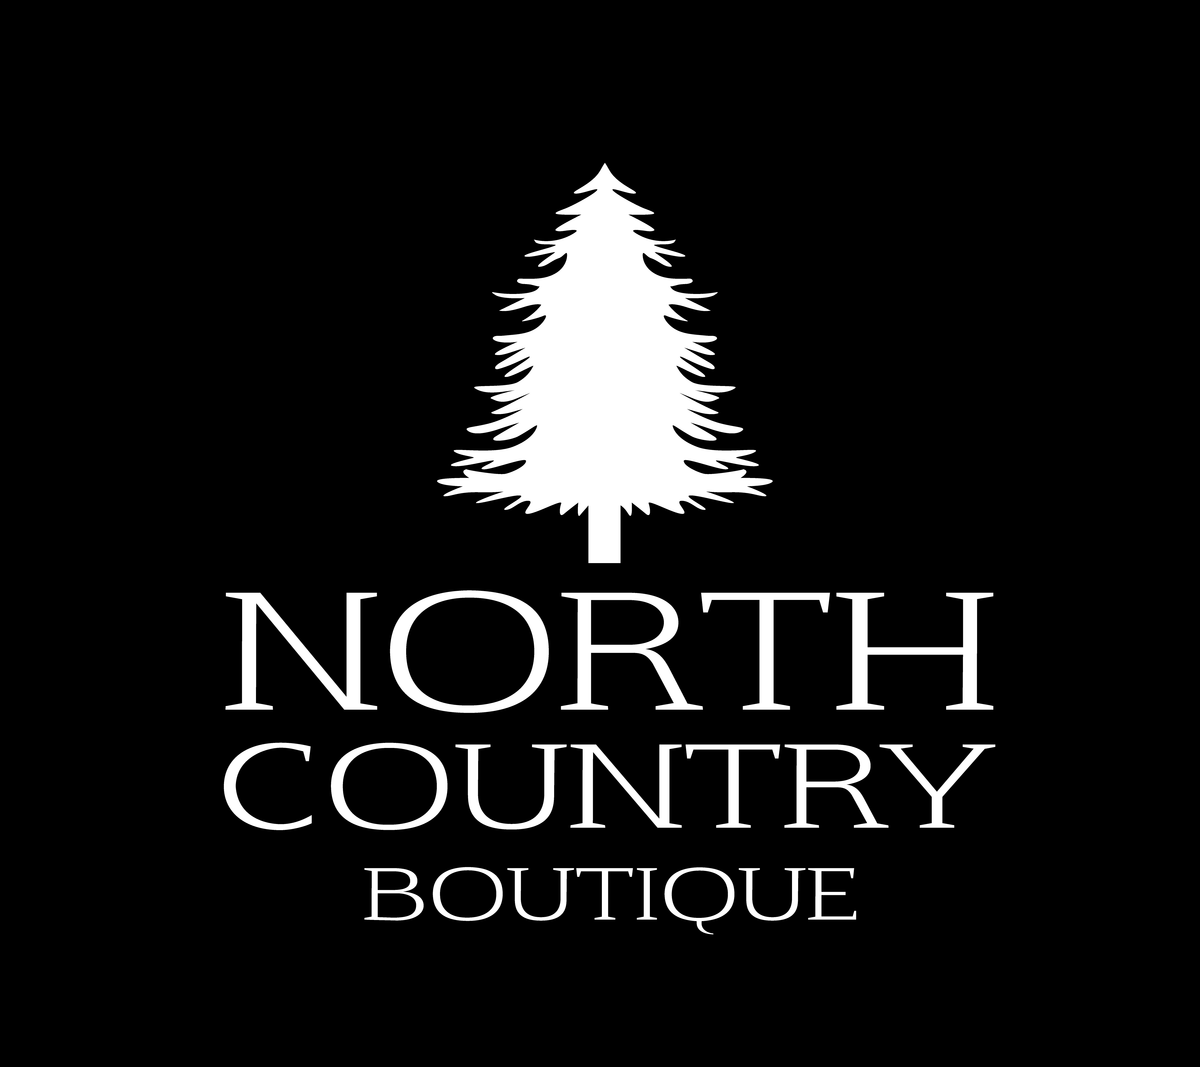 North Country Boutique